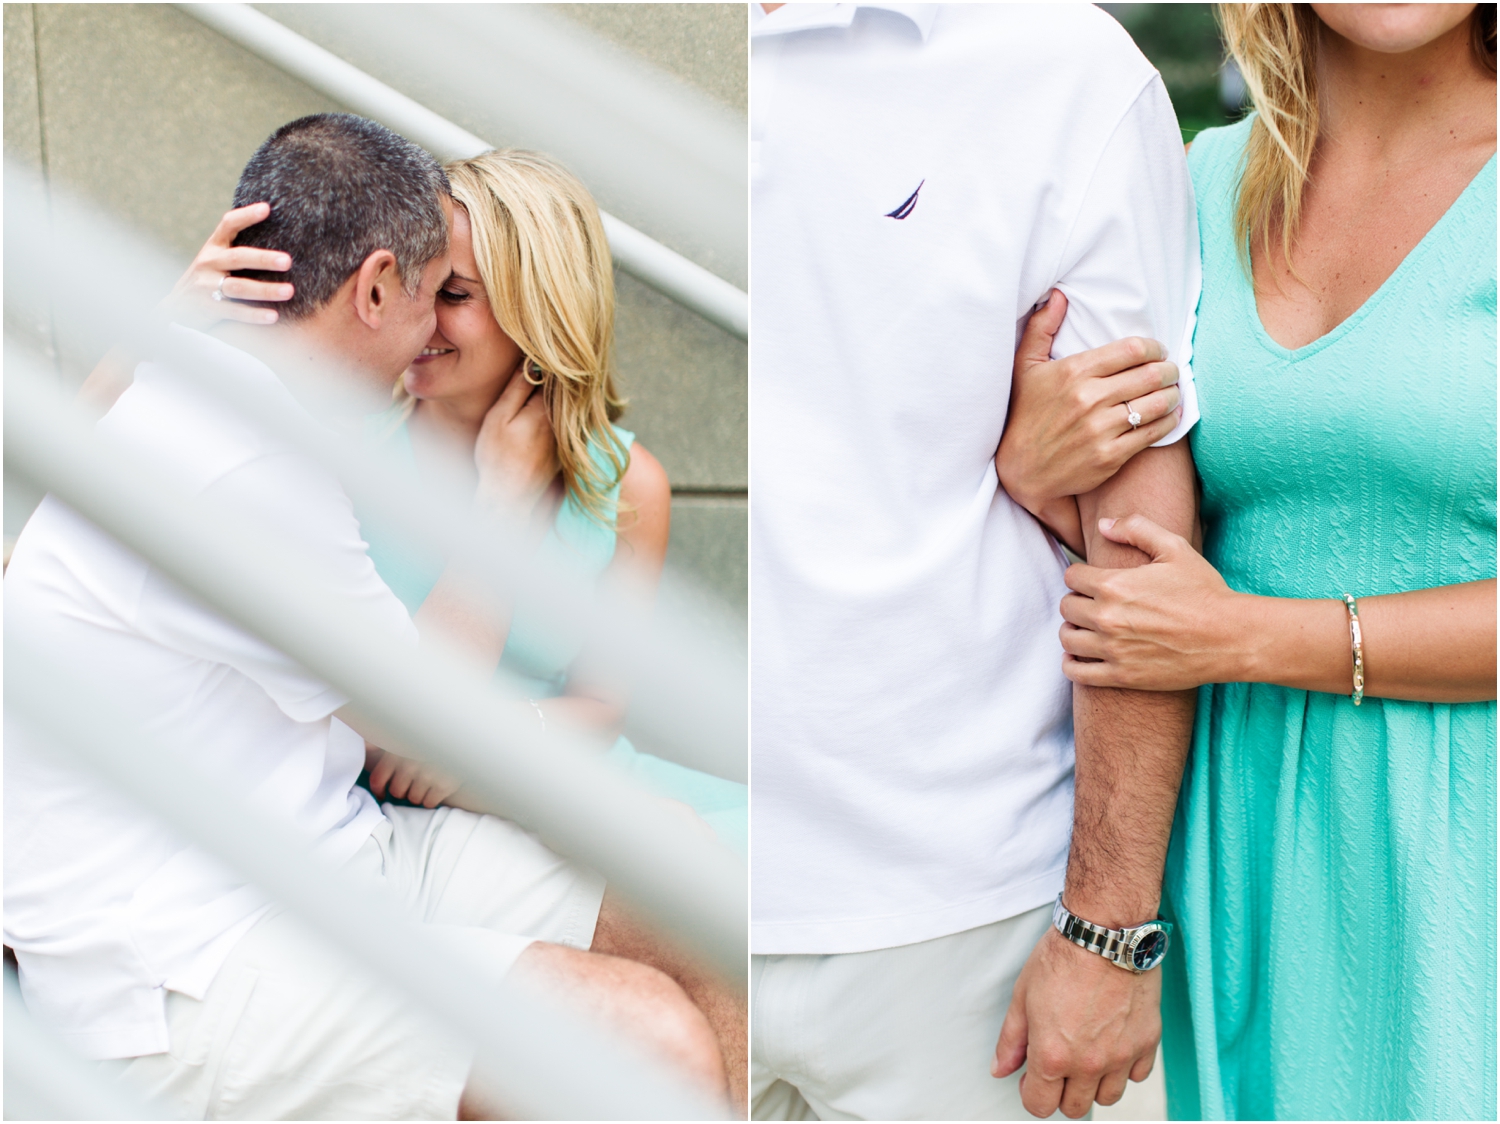 Chicago Union Station Engagement Pictures | Chicago Engagement Photographer | Jill Tiongco Photography